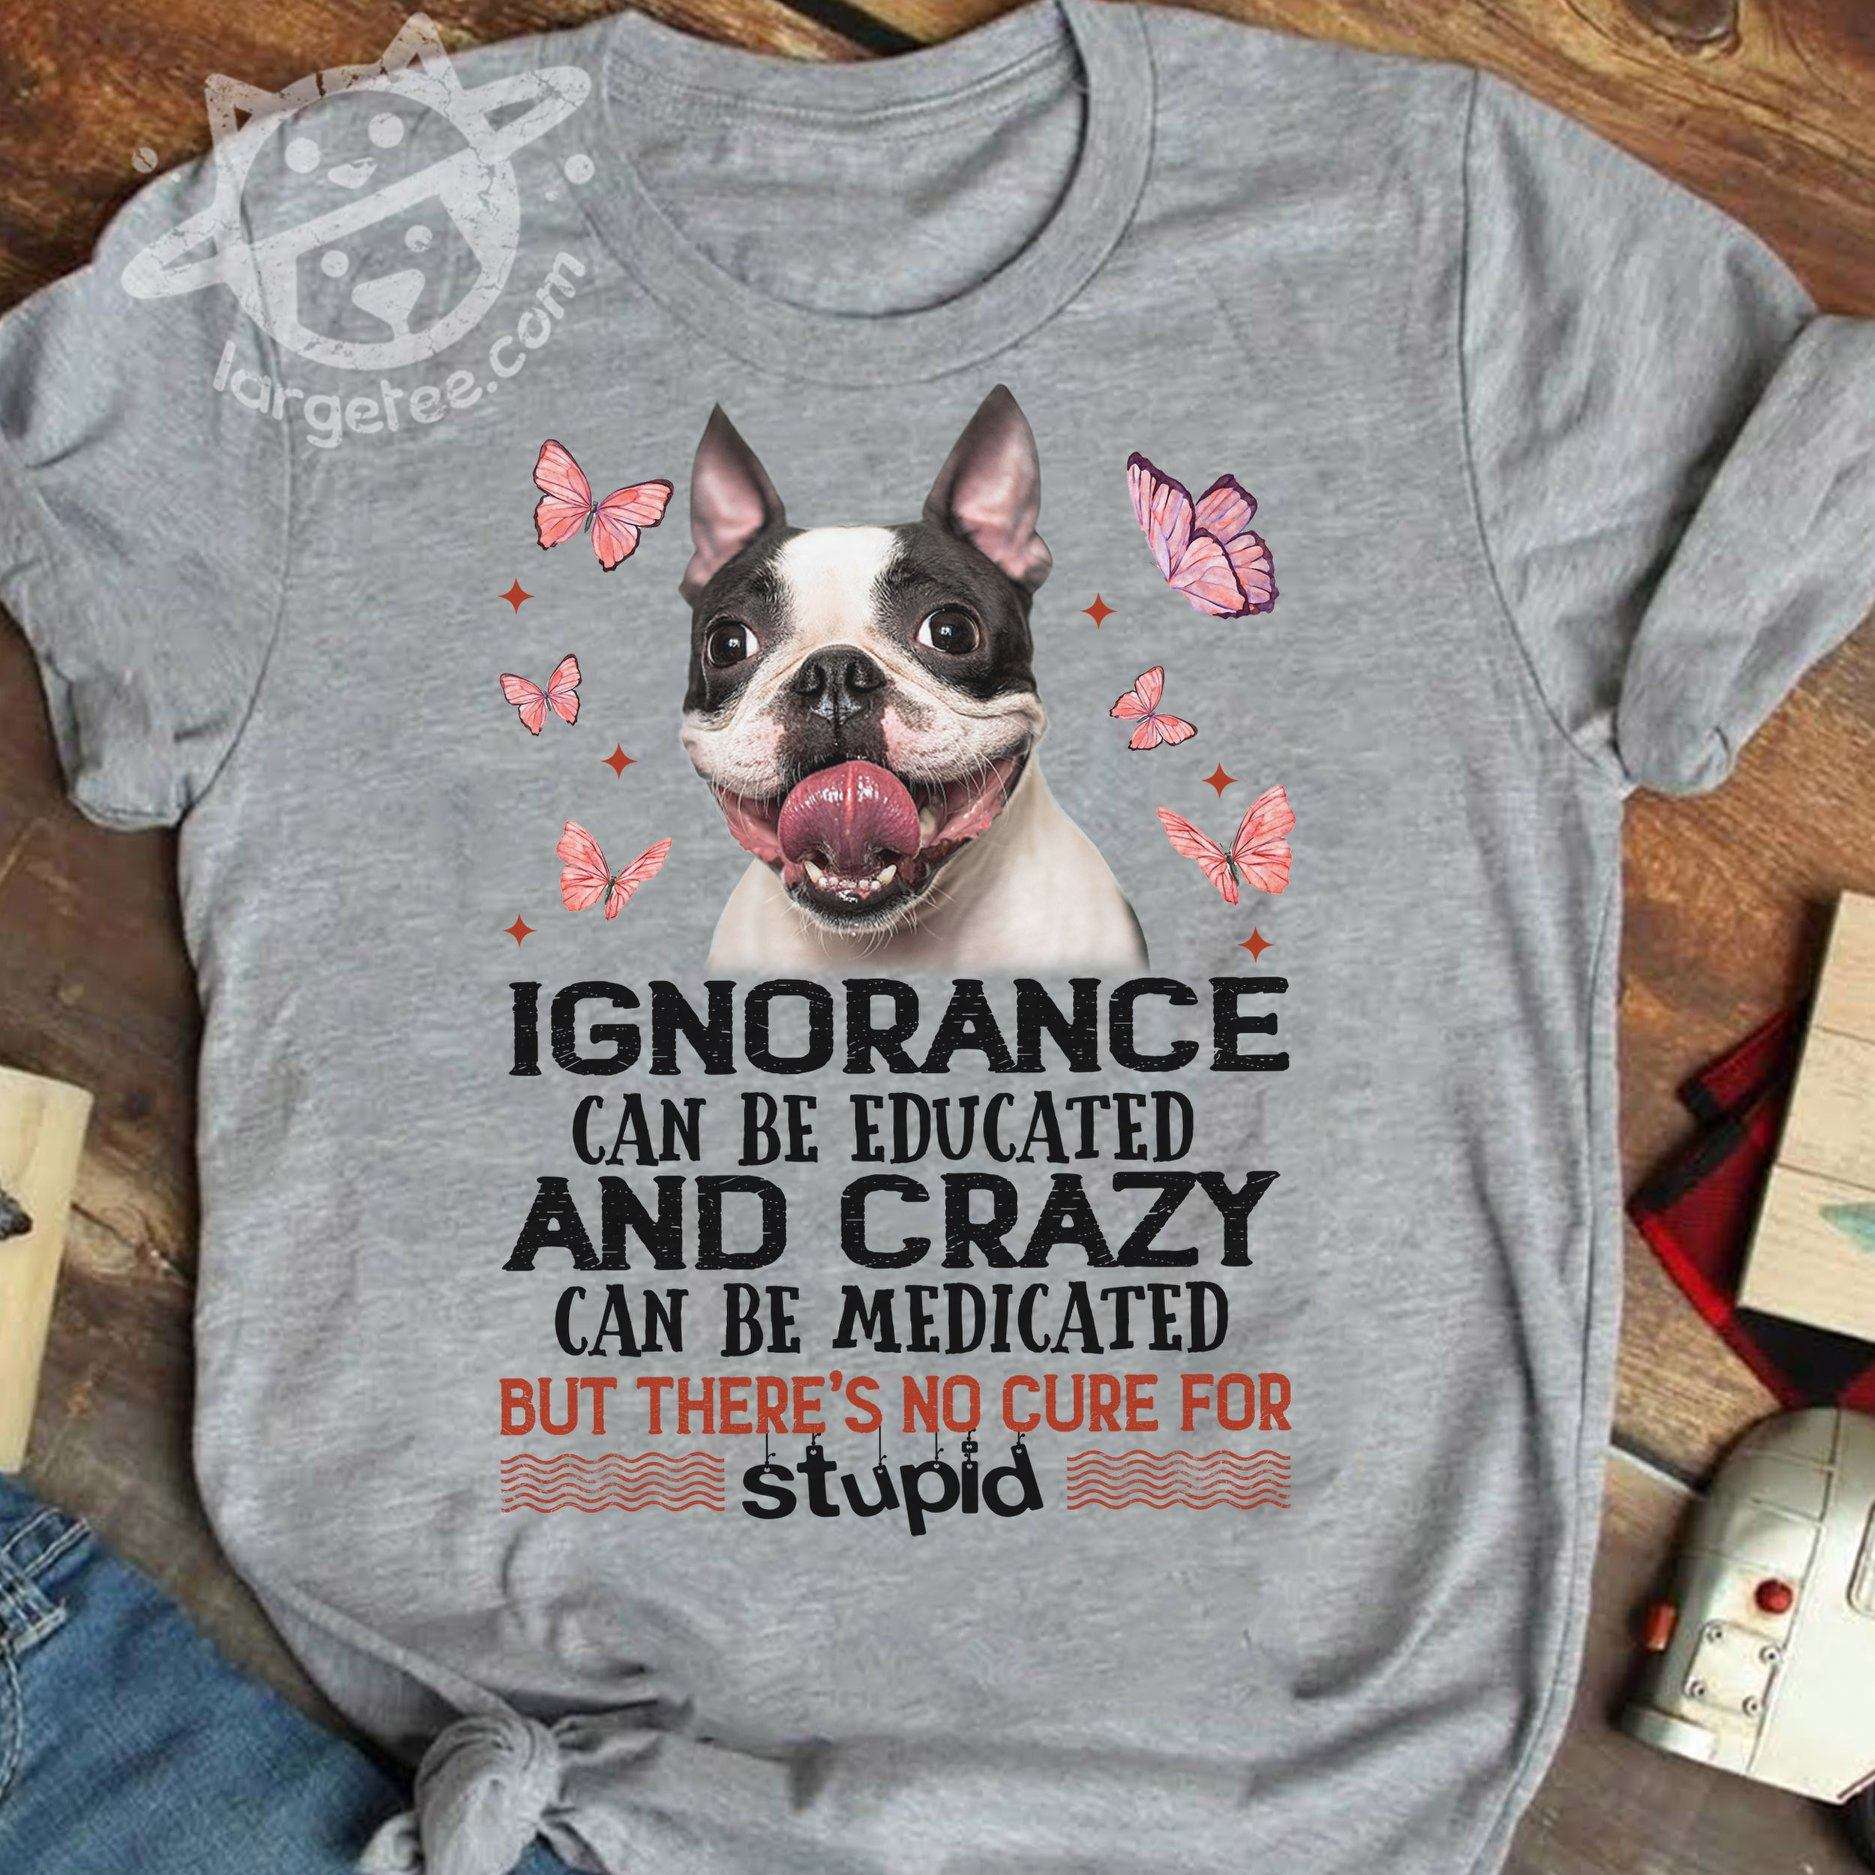 Ignorance can be educated and crazy can be medicated but there's no cure for stupid - Frenchie dog